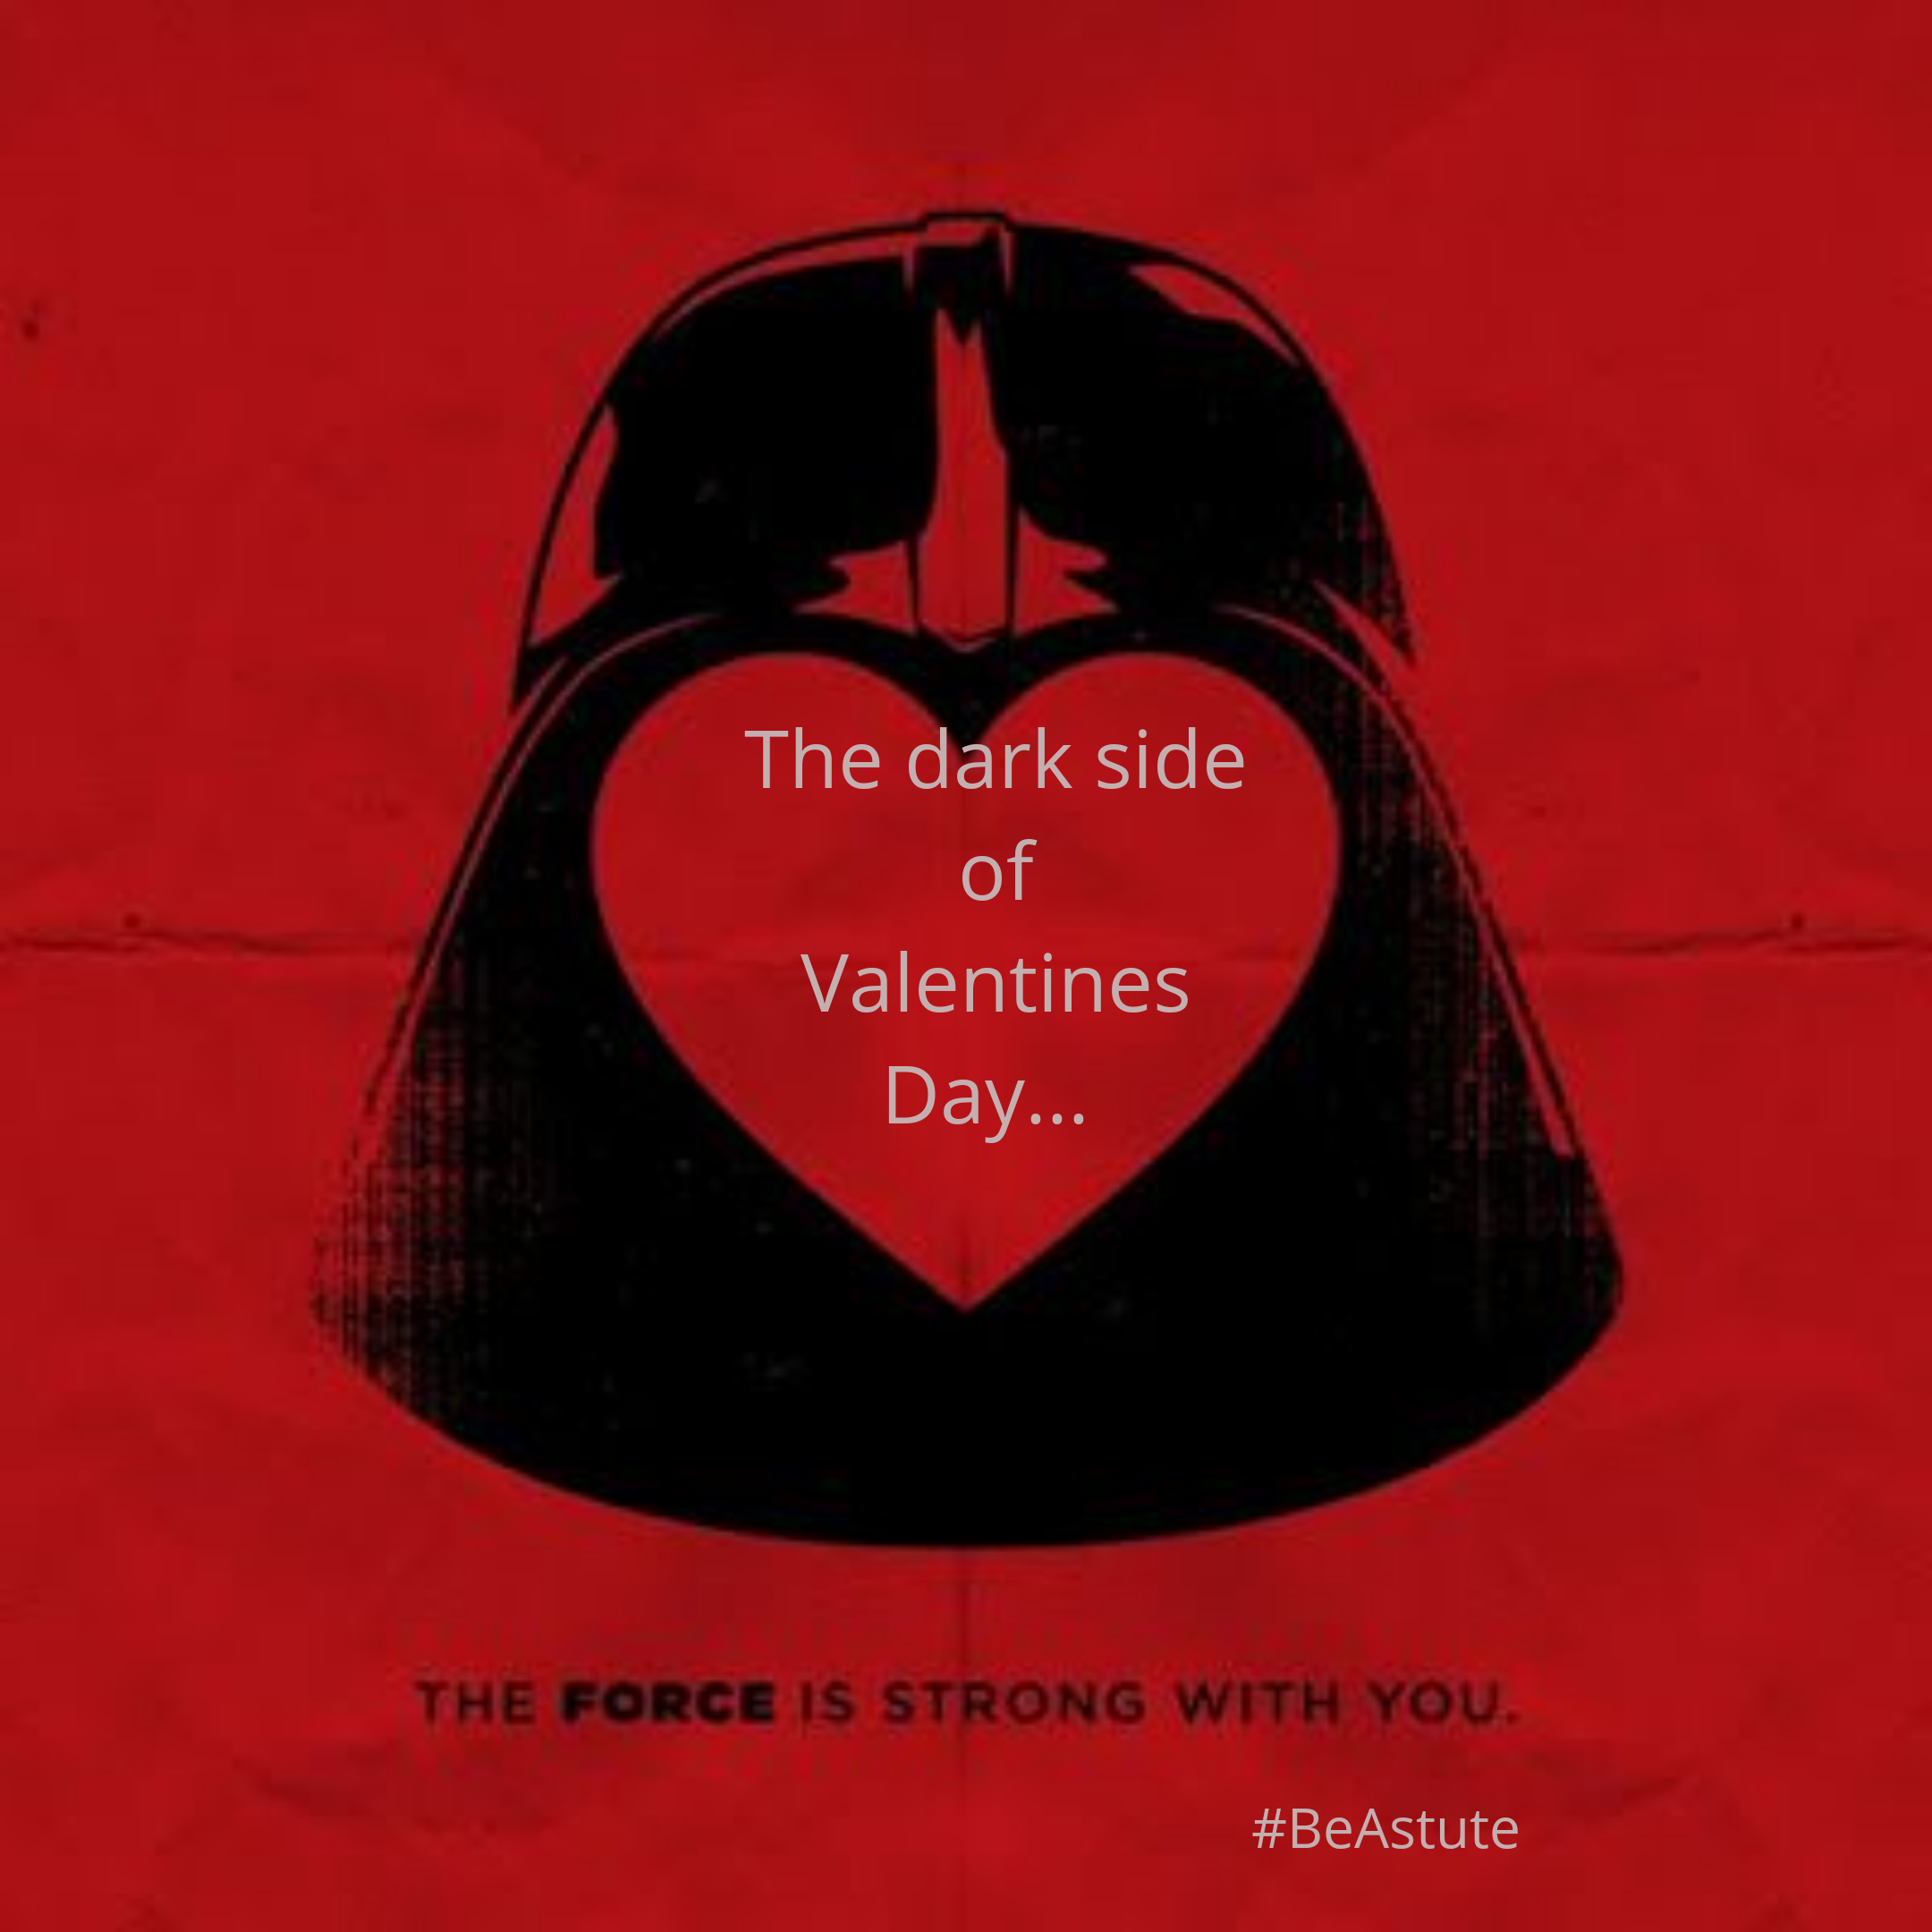 The Dark Side of Valentines Day and other key dates in the year